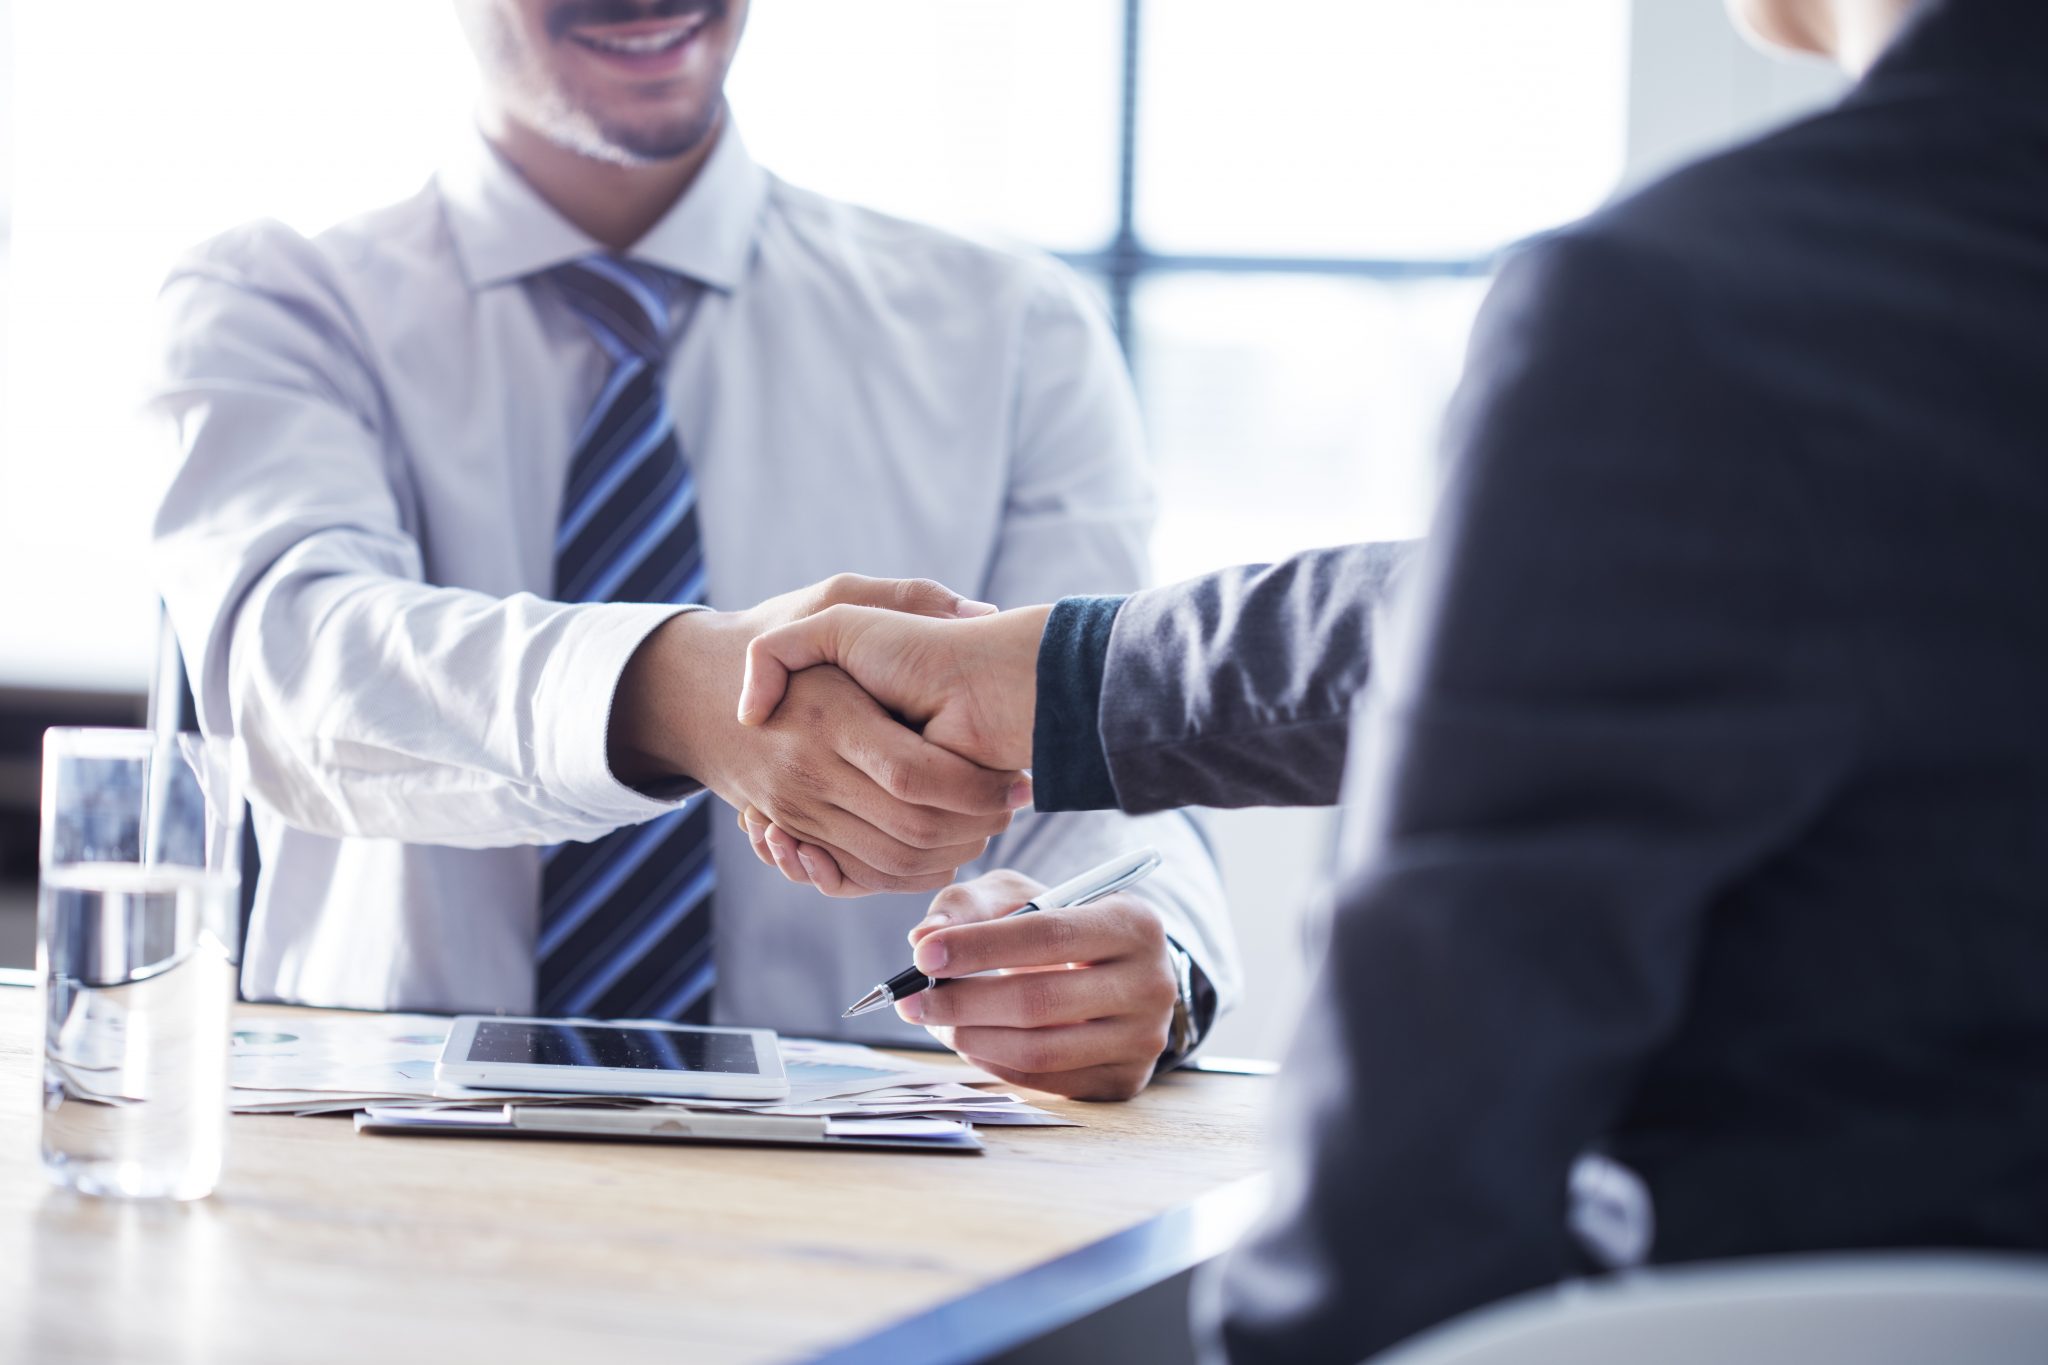 Two business people shaking hands at a table.